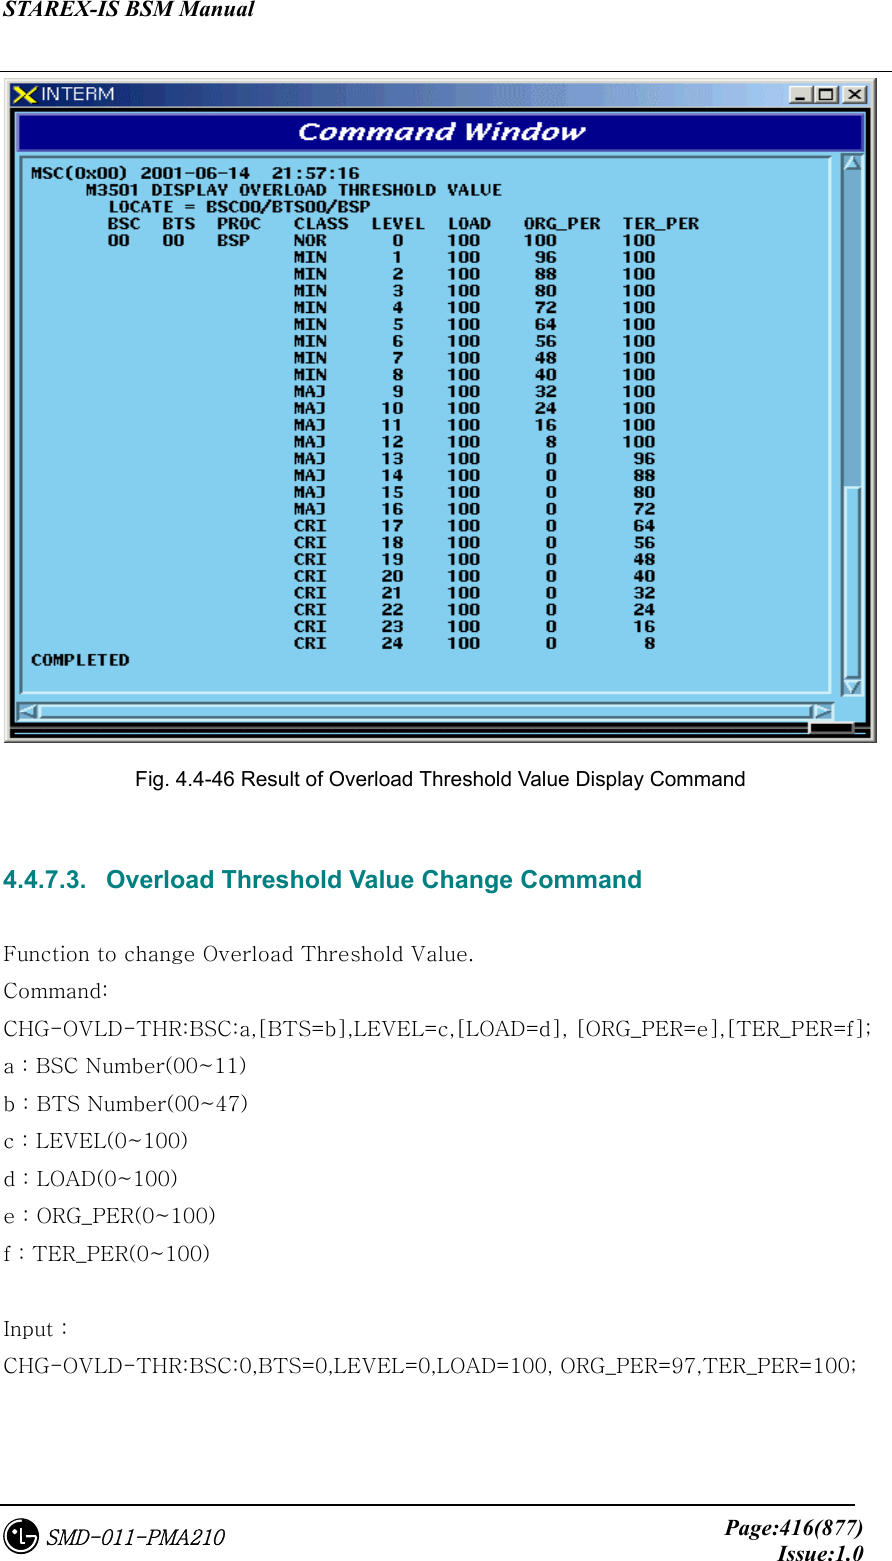 STAREX-IS BSM Manual     Page:416(877)Issue:1.0SMD-011-PMA210  Fig. 4.4-46 Result of Overload Threshold Value Display Command  4.4.7.3.   Overload Threshold Value Change Command  Function to change Overload Threshold Value. Command: CHG-OVLD-THR:BSC:a,[BTS=b],LEVEL=c,[LOAD=d], [ORG_PER=e],[TER_PER=f]; a : BSC Number(00~11) b : BTS Number(00~47) c : LEVEL(0~100) d : LOAD(0~100) e : ORG_PER(0~100) f : TER_PER(0~100)  Input : CHG-OVLD-THR:BSC:0,BTS=0,LEVEL=0,LOAD=100, ORG_PER=97,TER_PER=100;  